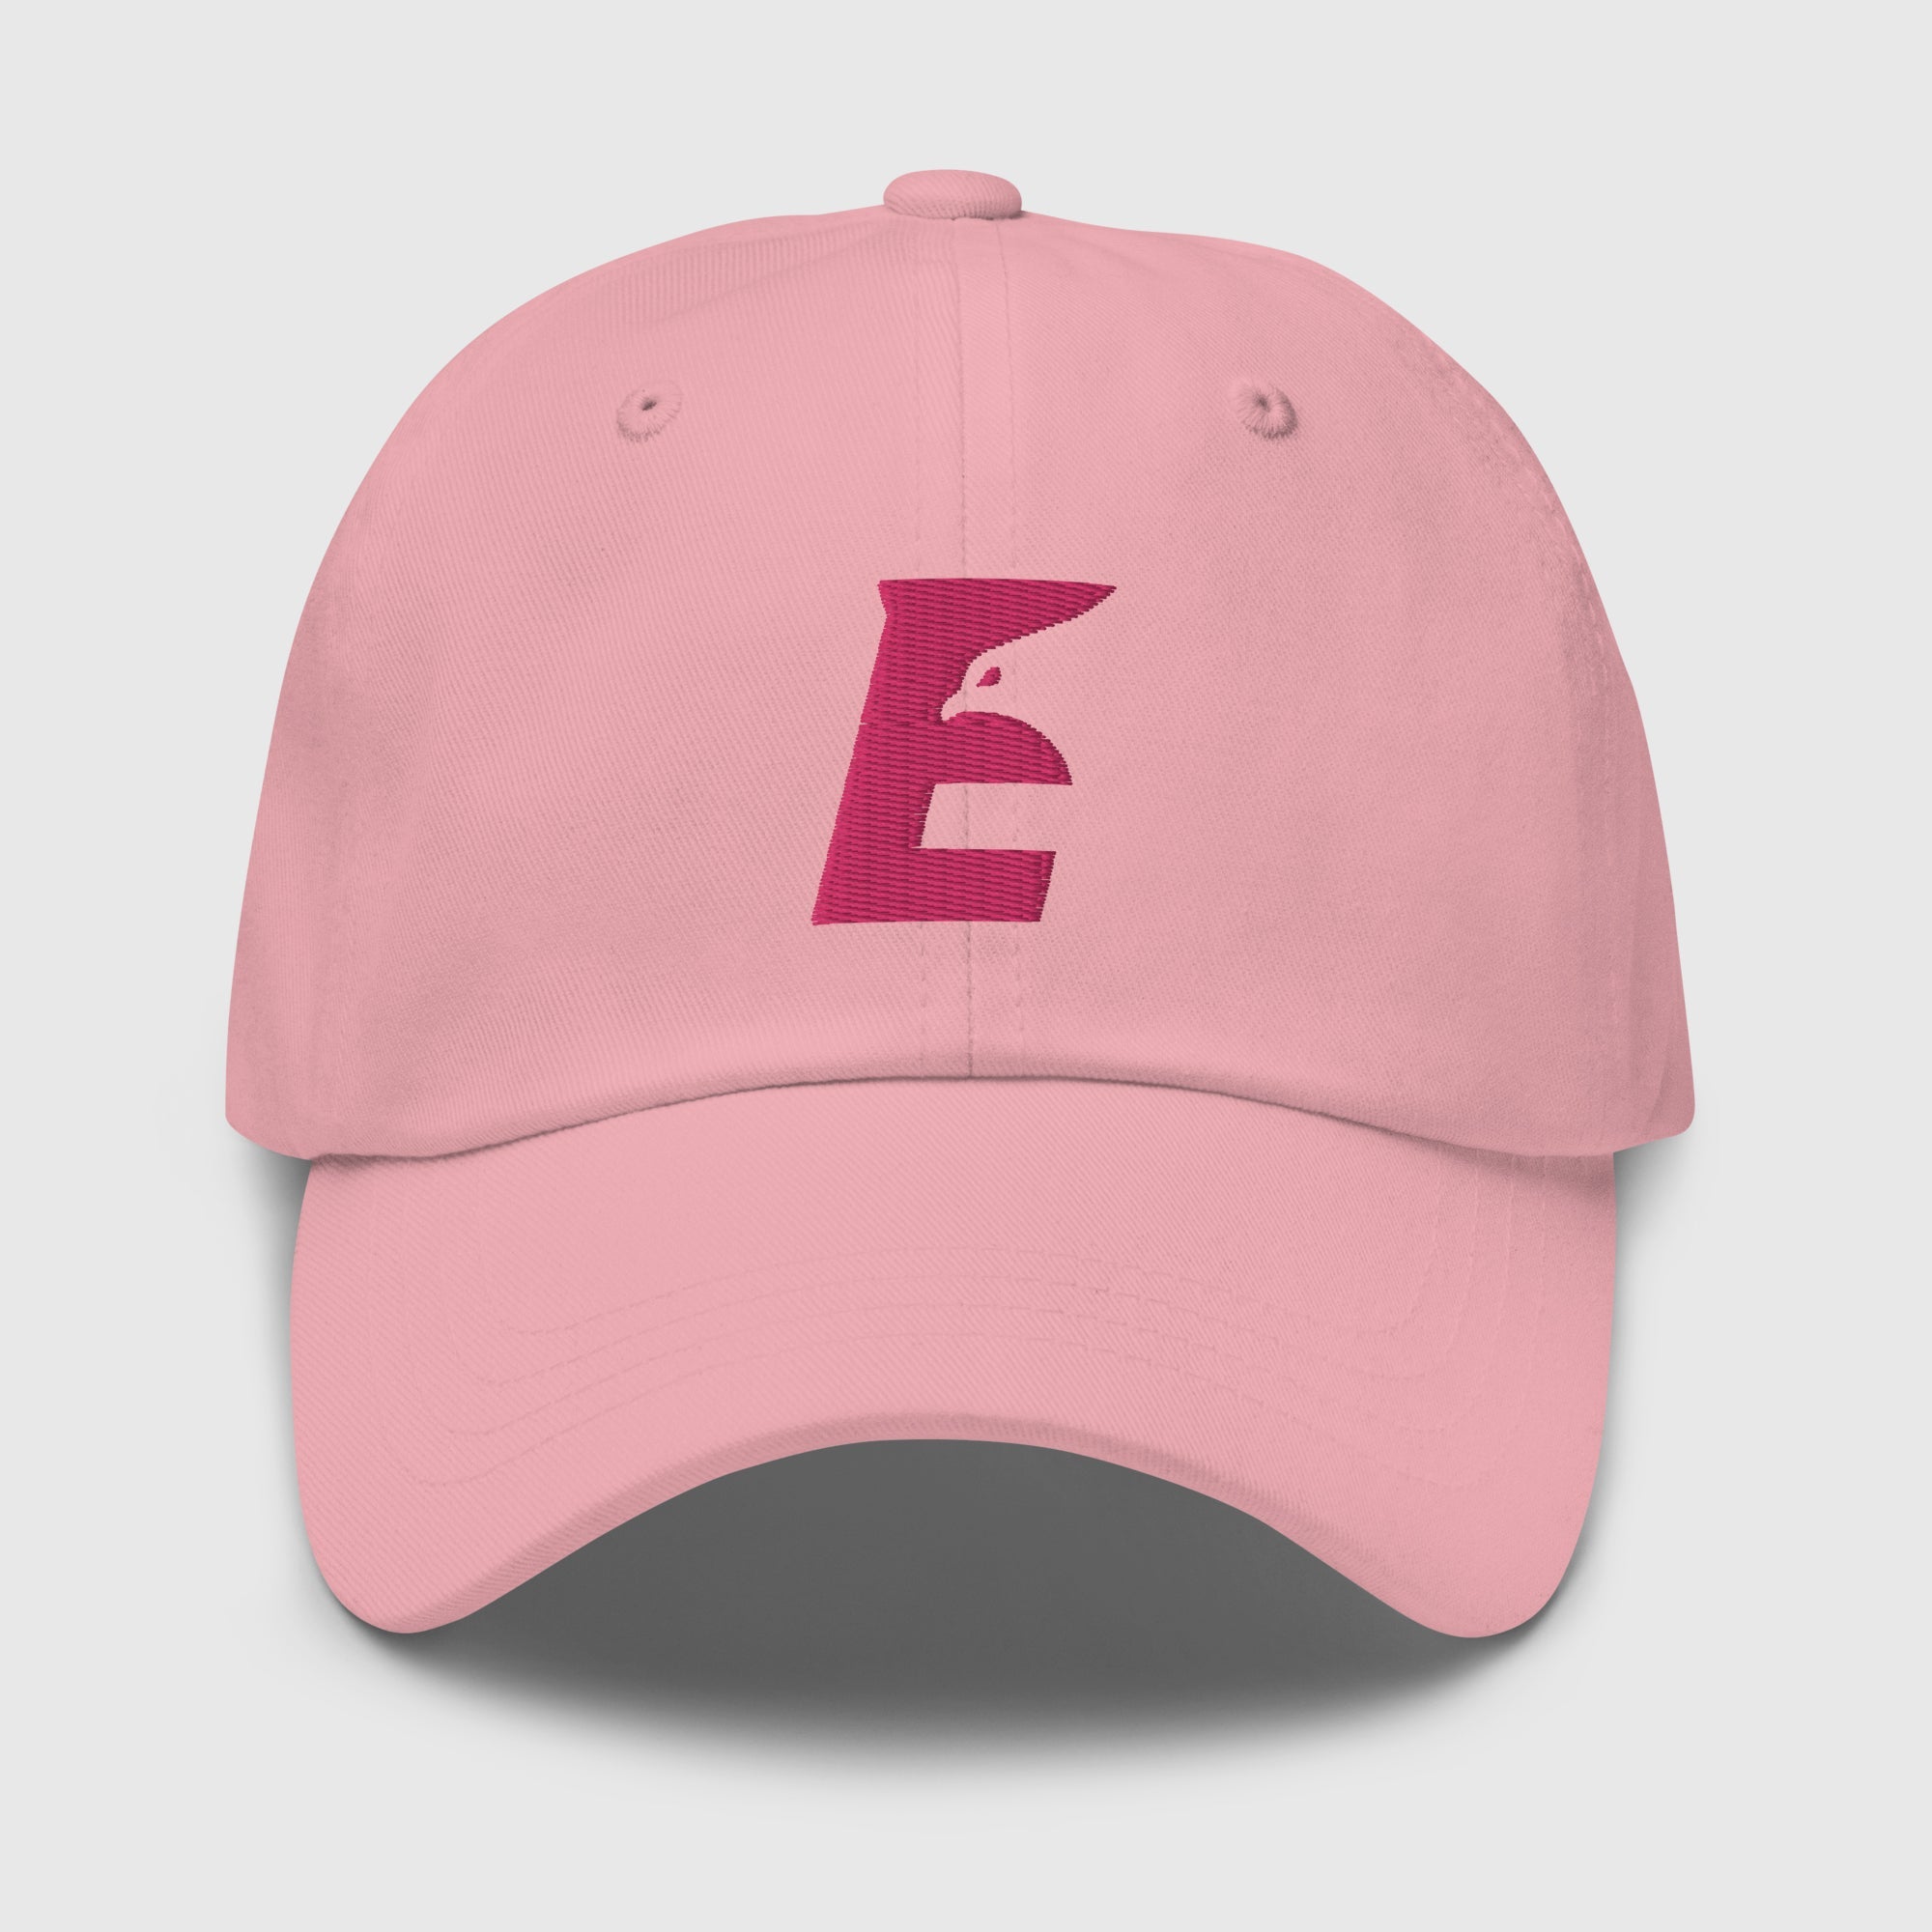 Cap Red Pink - Eagle